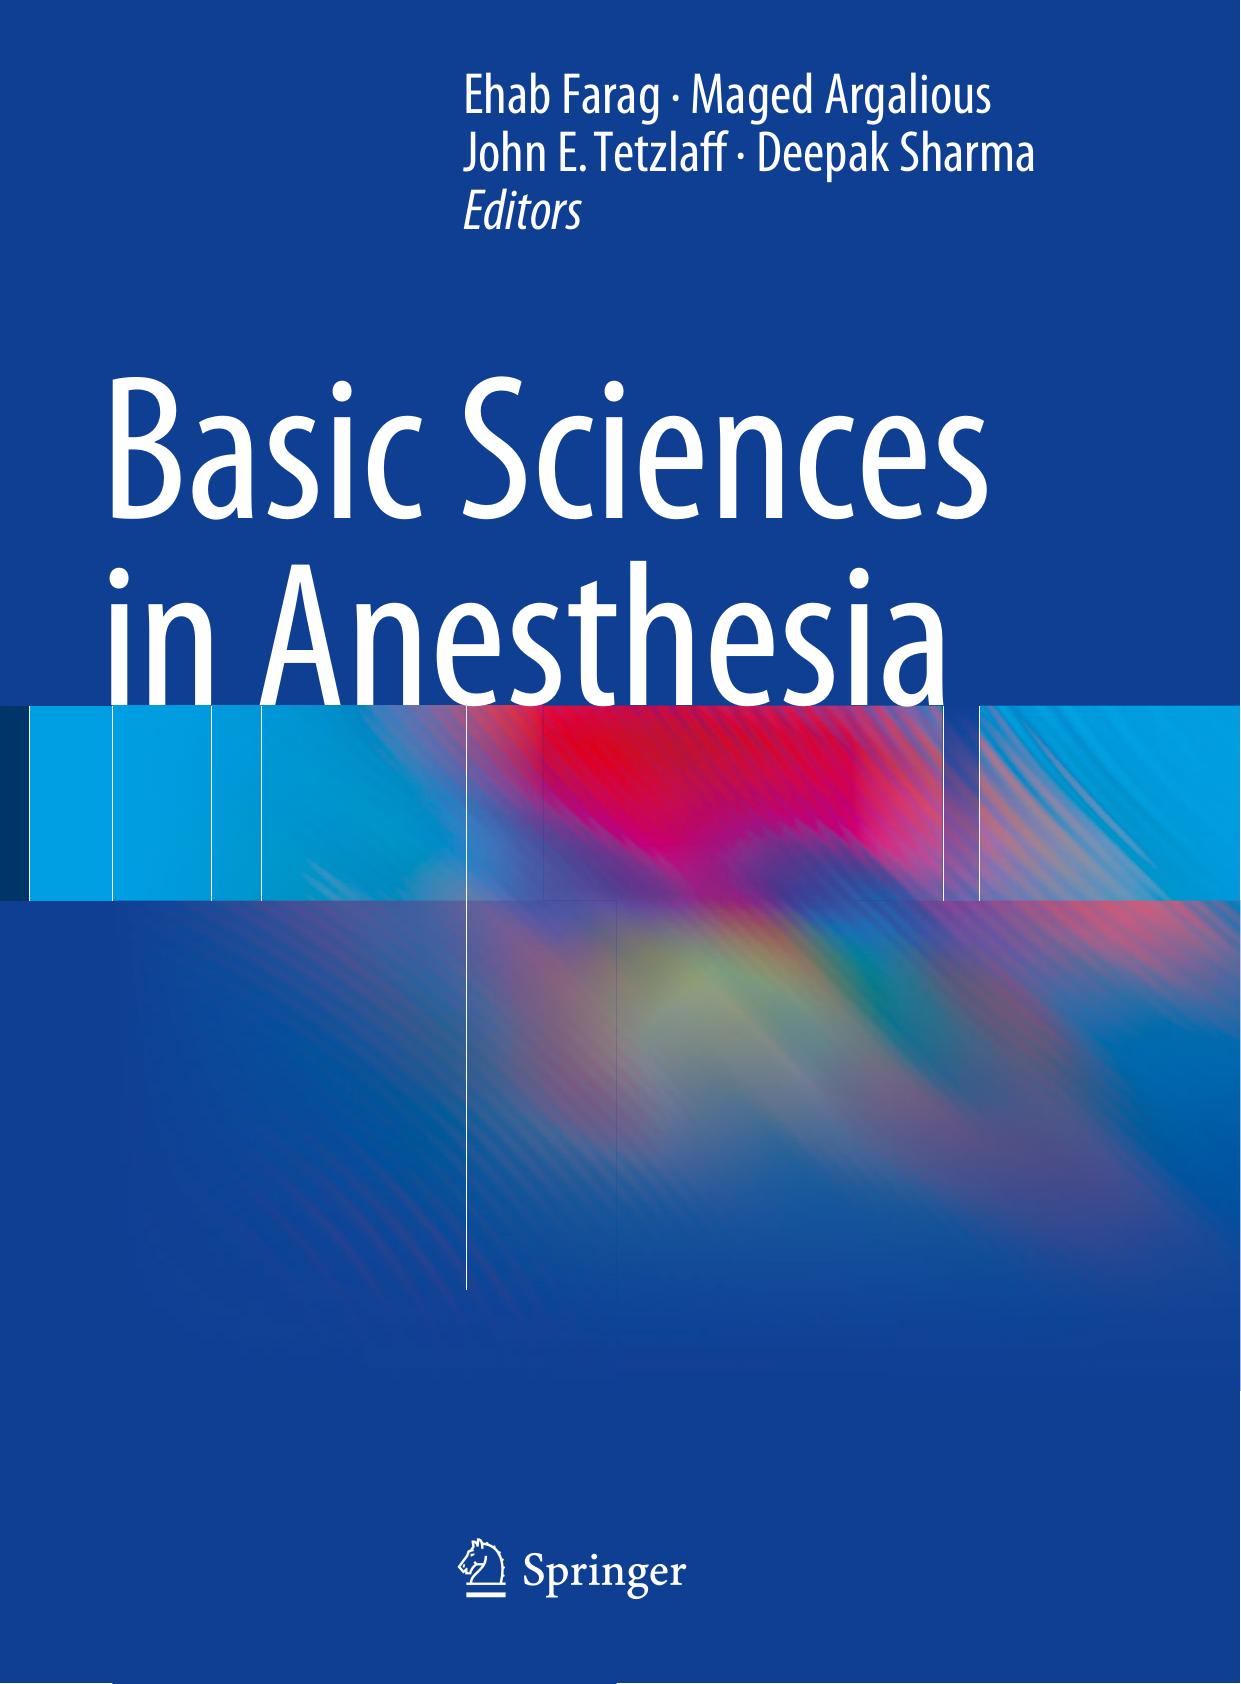 Basic Sciences in Anesthesia 2018